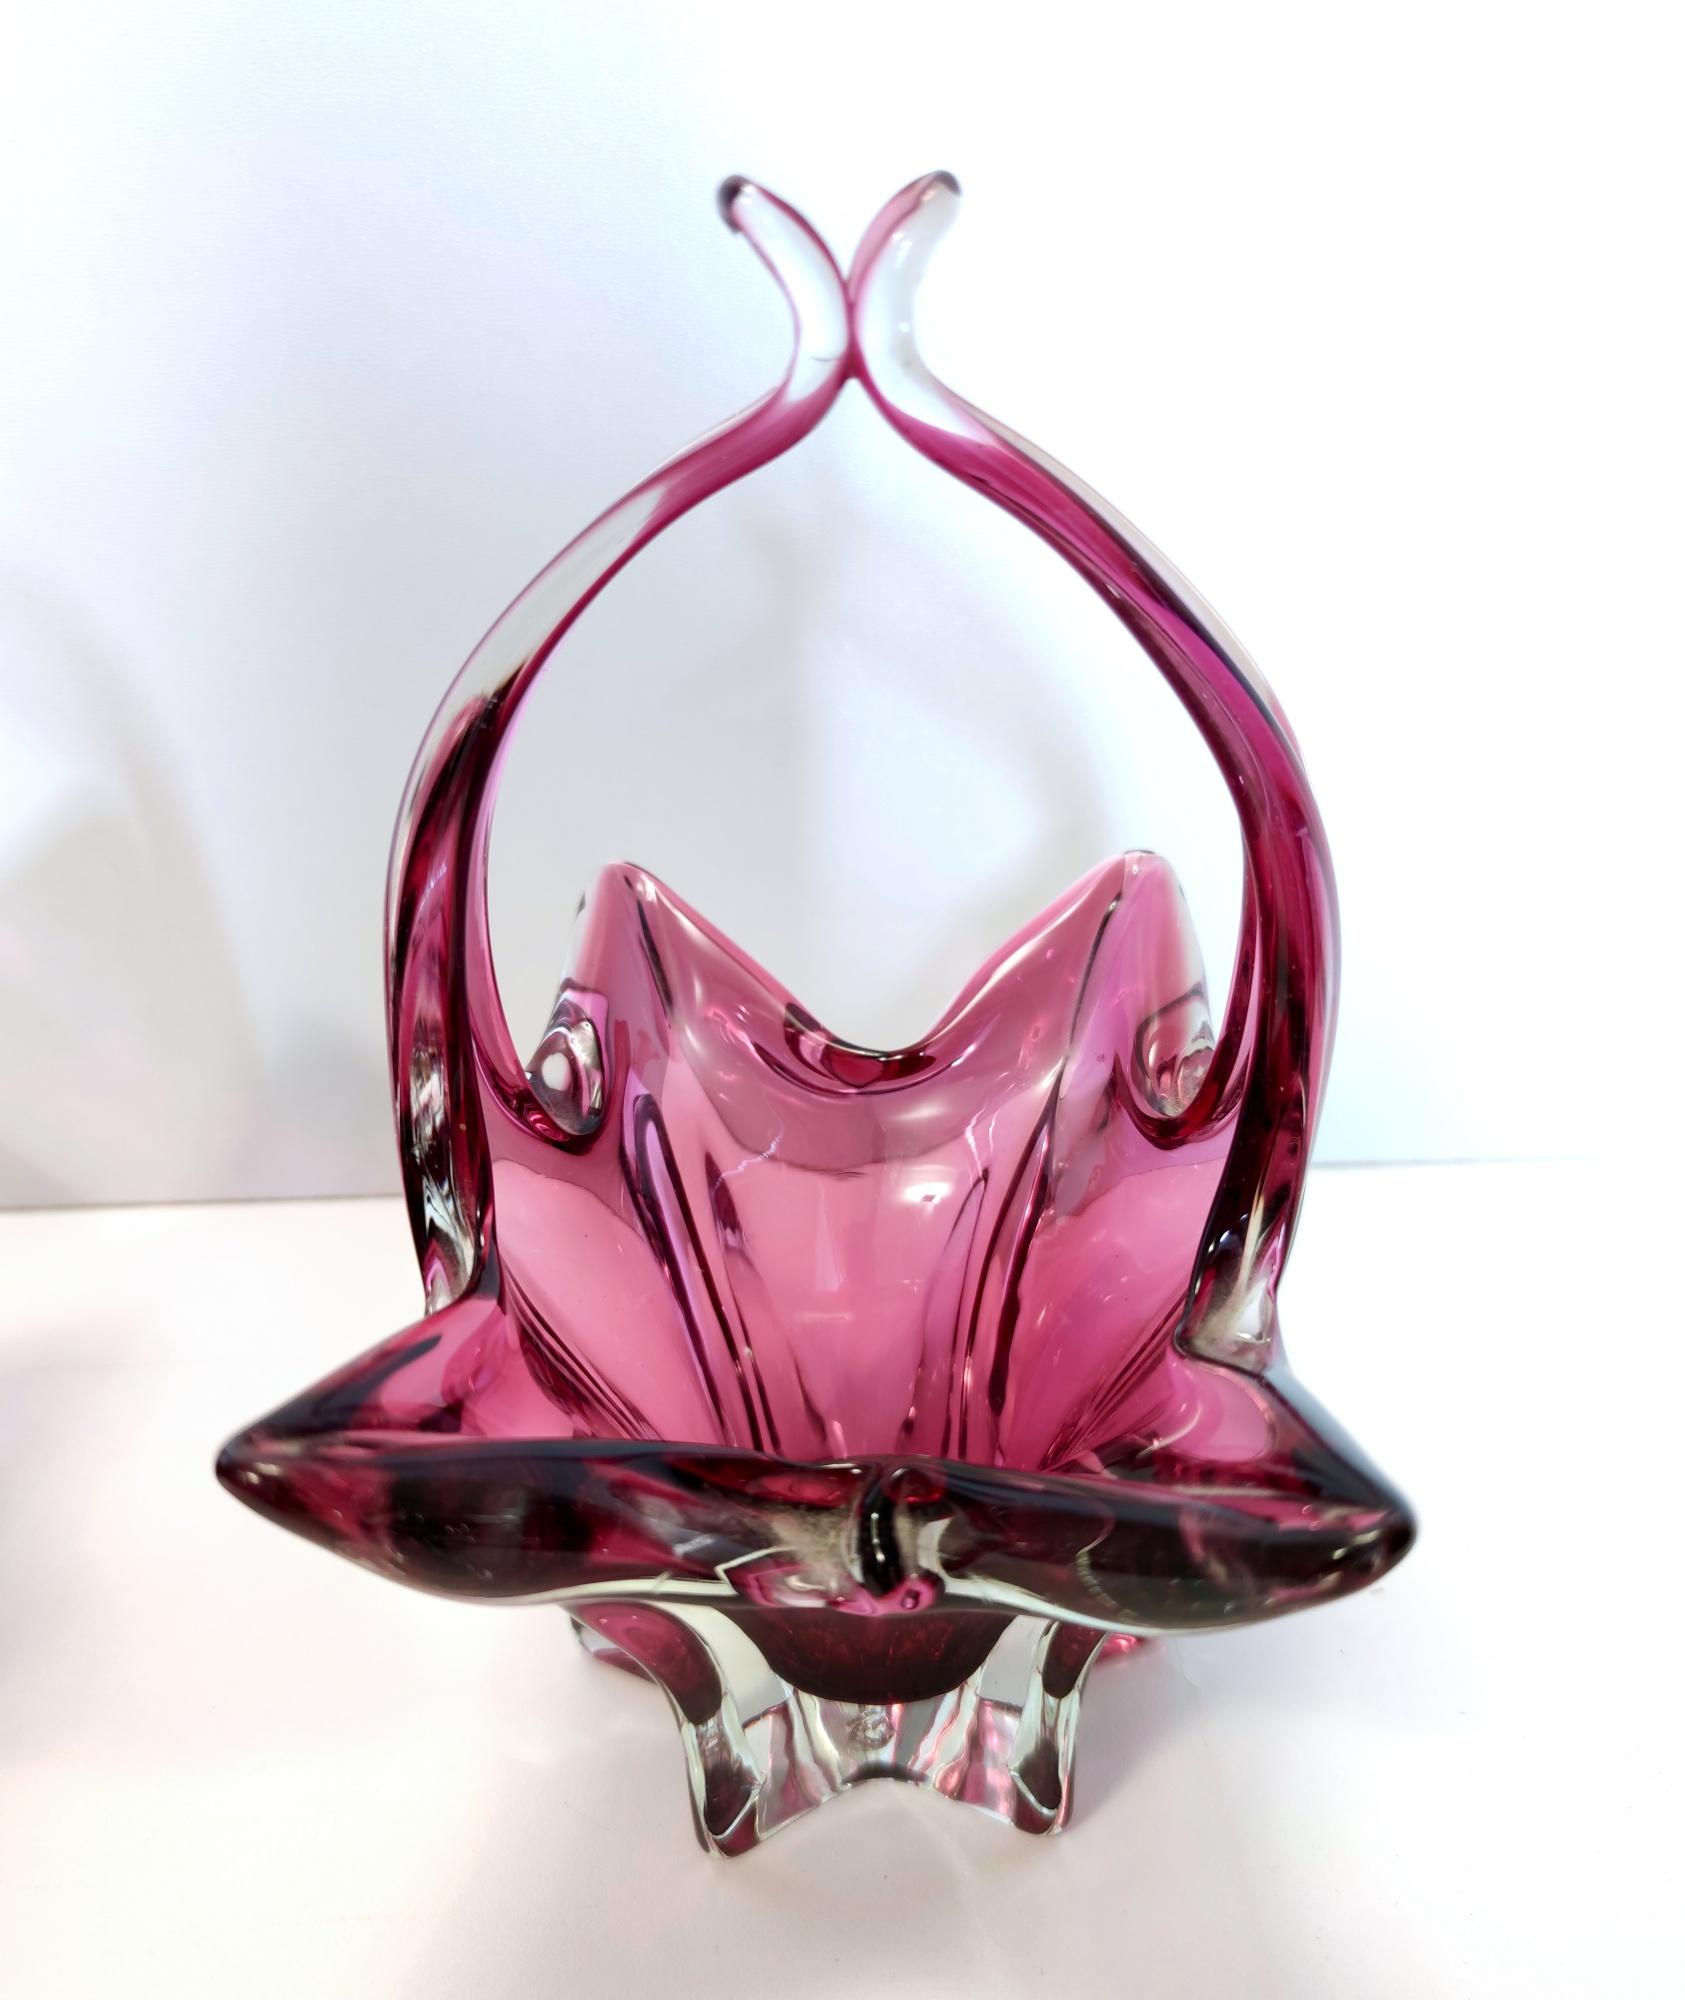 Pair of Vintage Pink Murano Glass Bonbonnières / Trinket Bowls, Italy For Sale 5